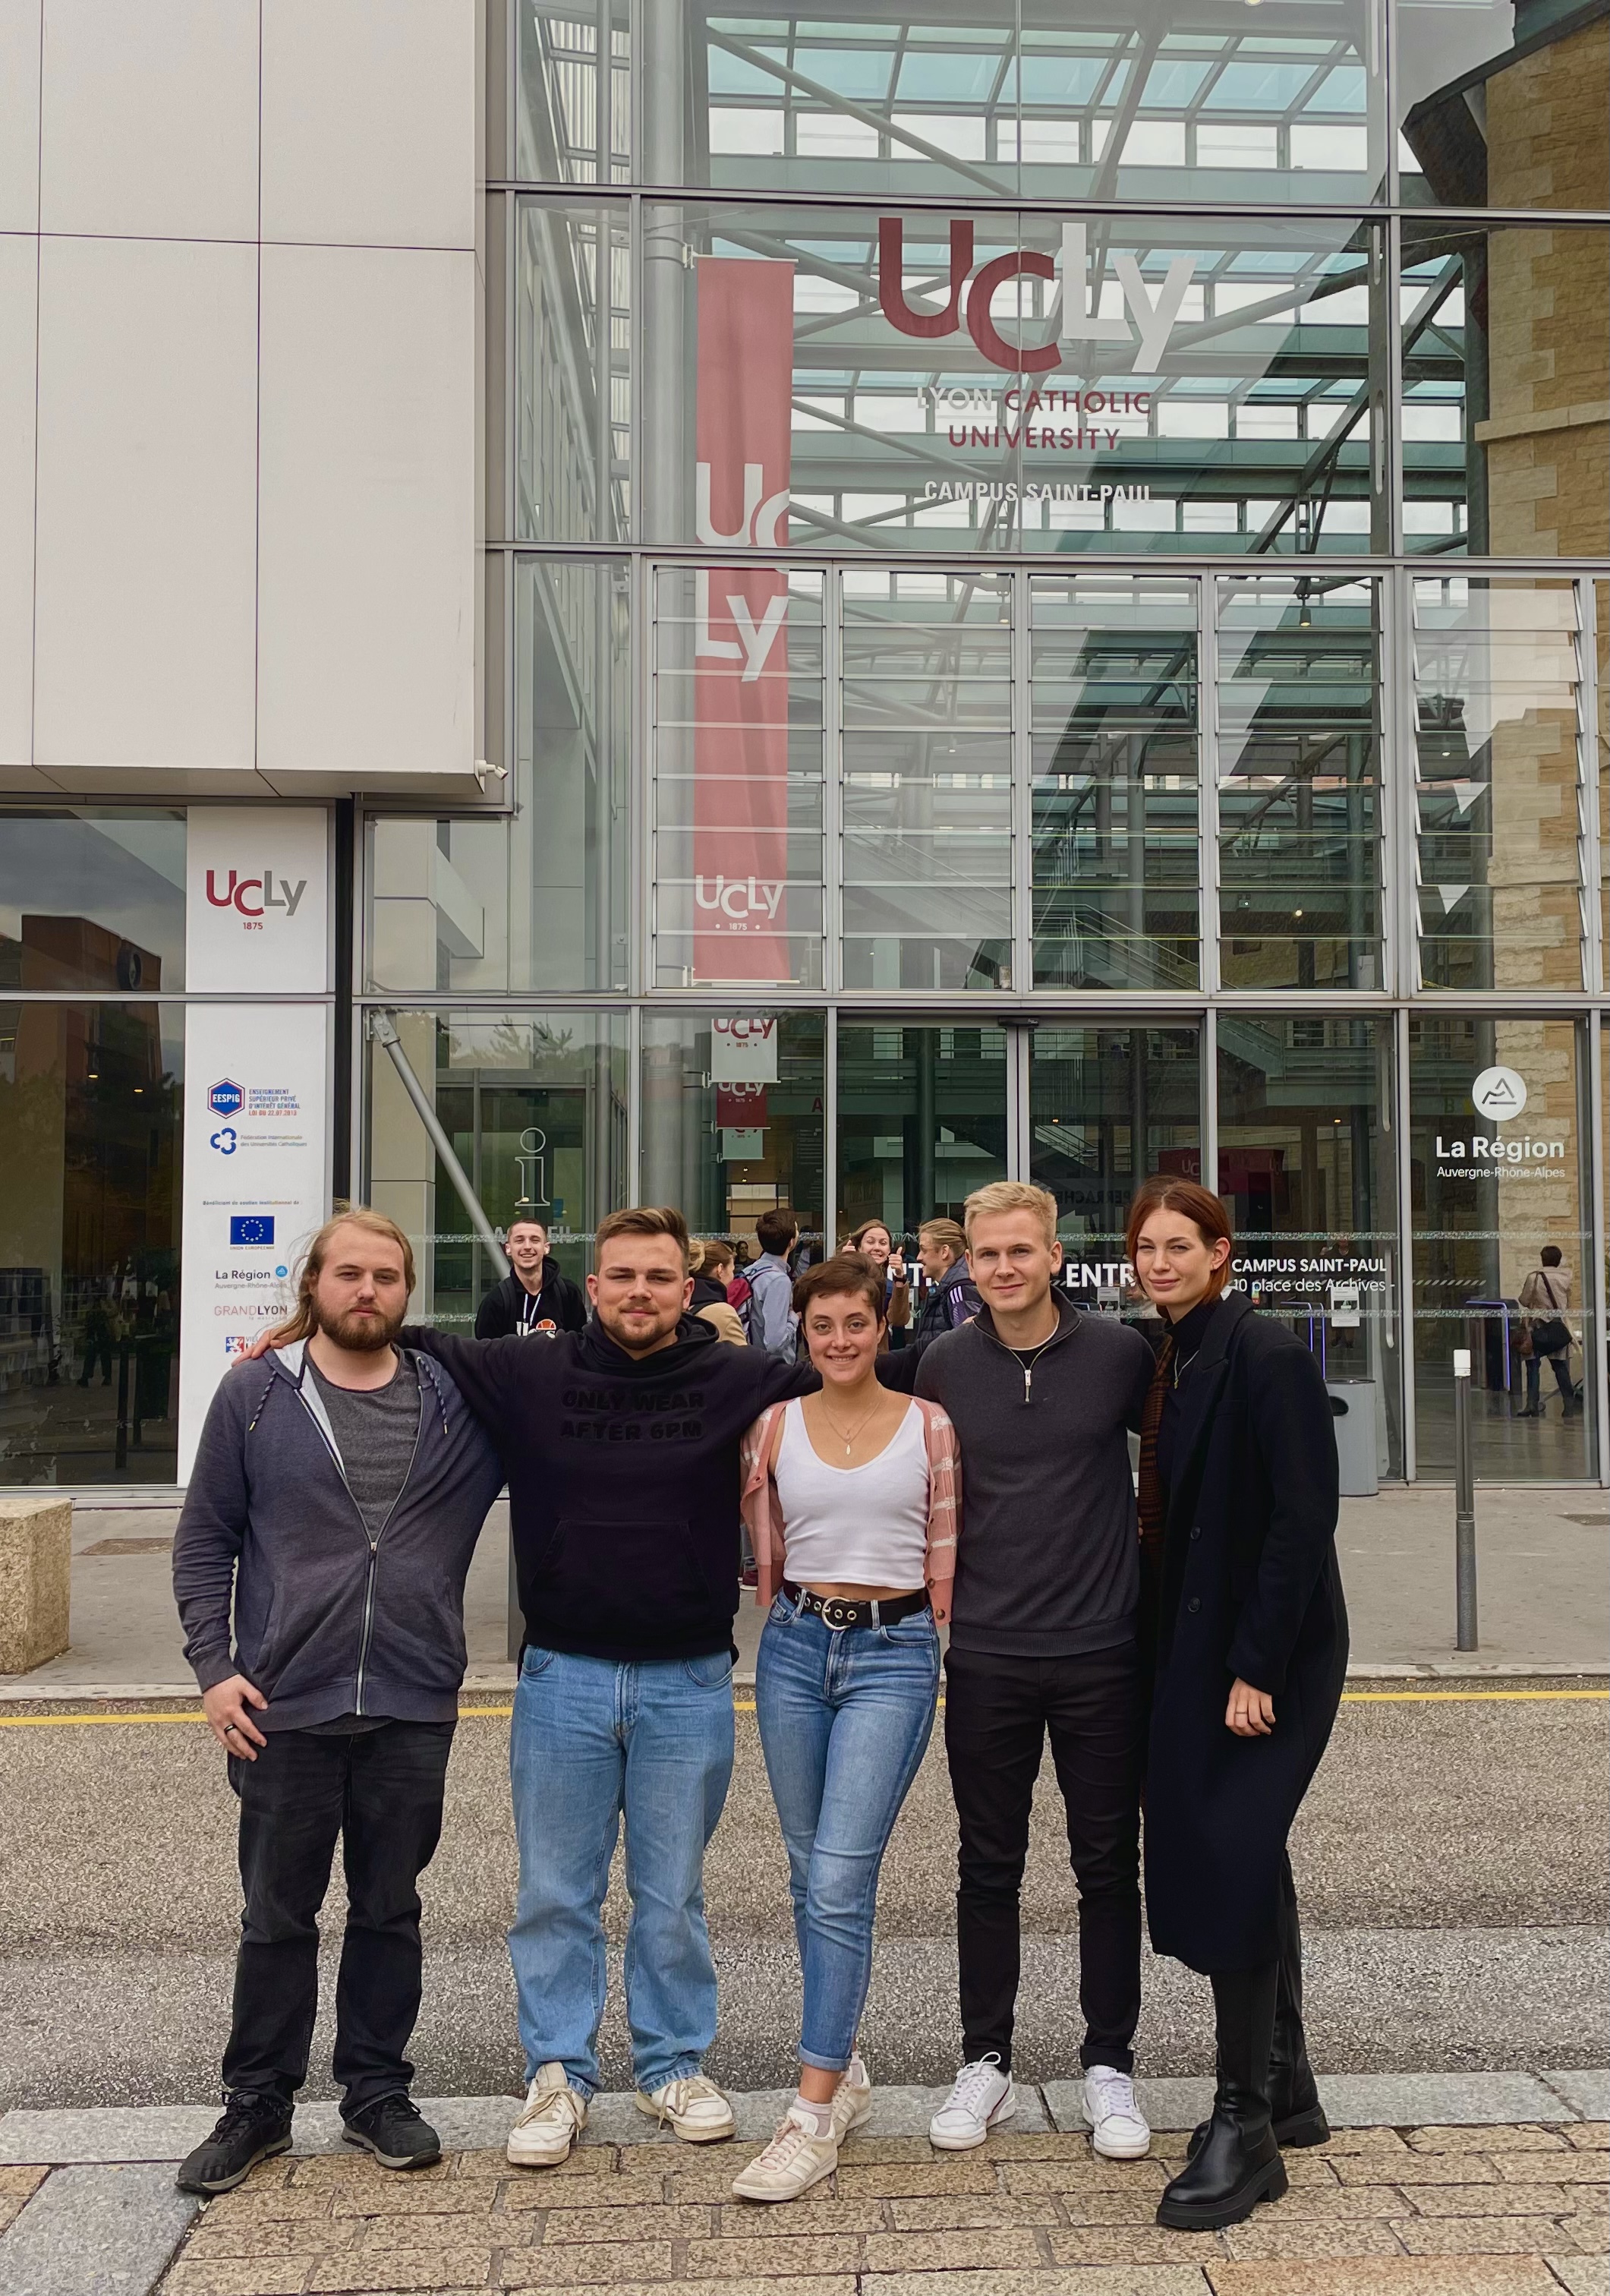 five students posing in front a university building of the Catholic University of Lyon. They seem to be in a relaxed and happy mood, possibly students or visitors to the campus. The building features a modern glass facade, which allows for a clear view of the interior from the outside. The architecture suggests a contemporary design, with the use of transparent materials to perhaps signify openness and enlightenment, values often associated with educational institutions